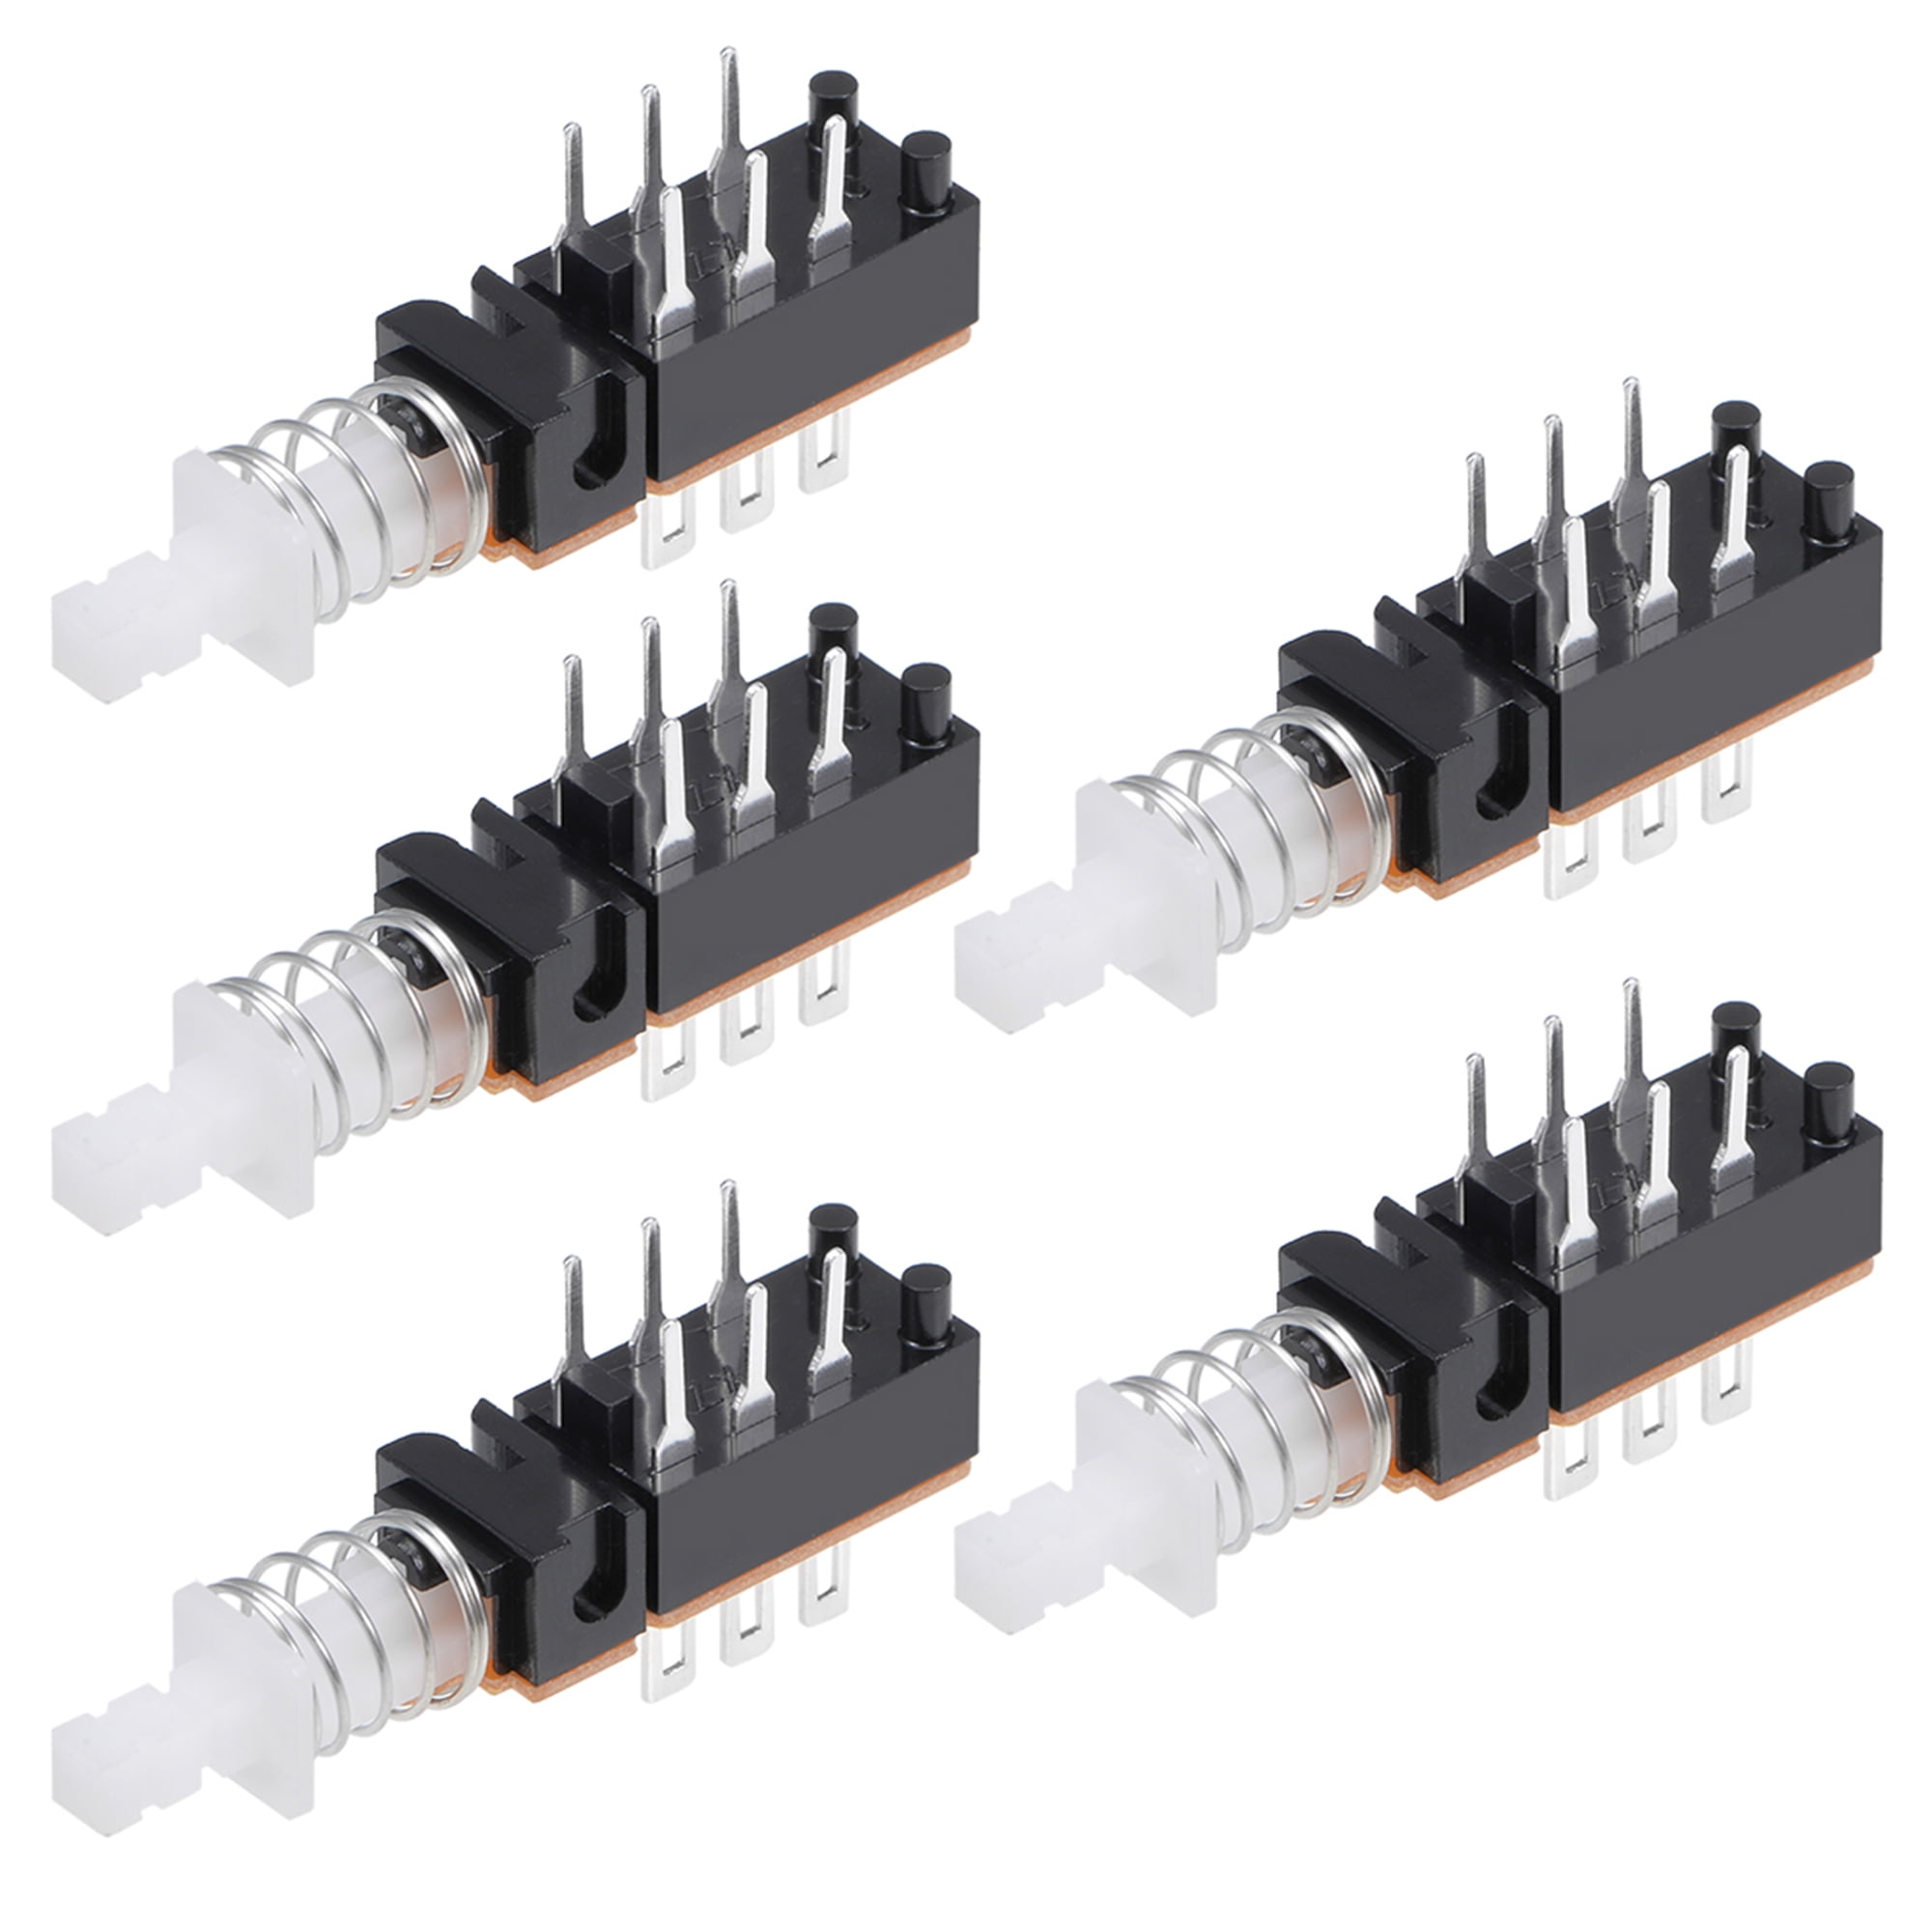 CYT1105 Qianxin Cylewet 6Pcs AC 2A 250V/5A 120V 6mm 6 Pins Momentary Push Button Switch DPDT No NC Pack of 6